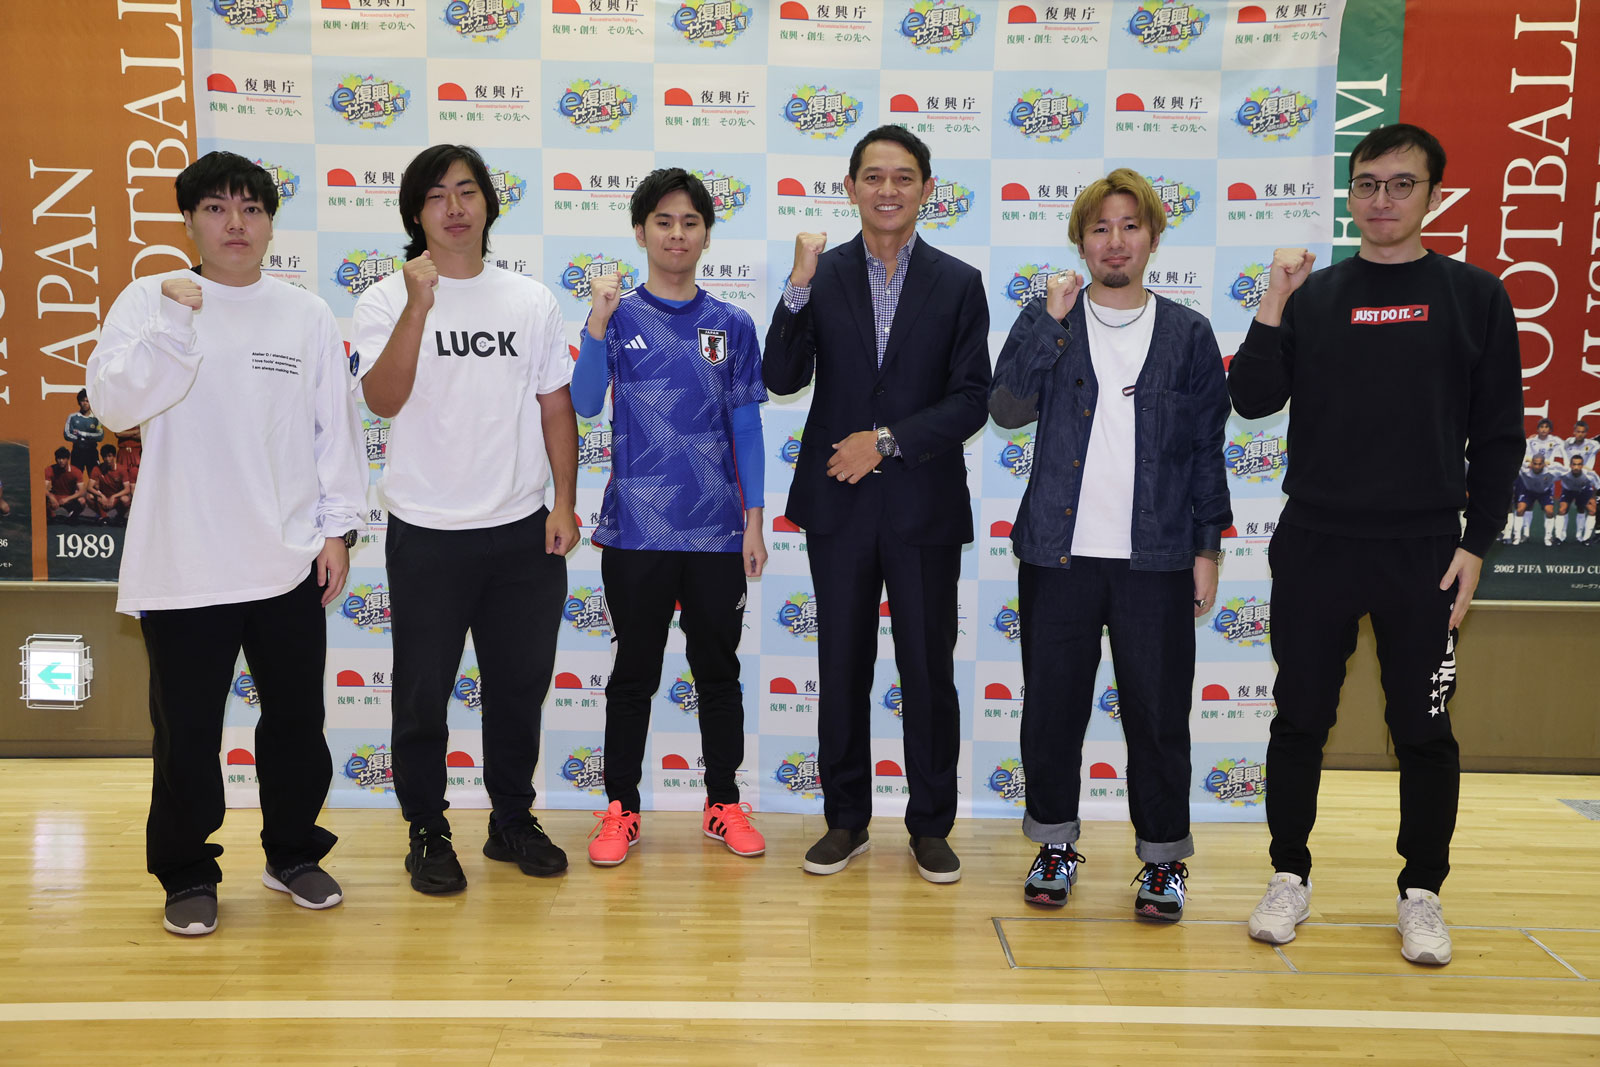 All team captains with Mr. NISHIOKA Akihiko(3rd from right)  and youxme (4th from right)